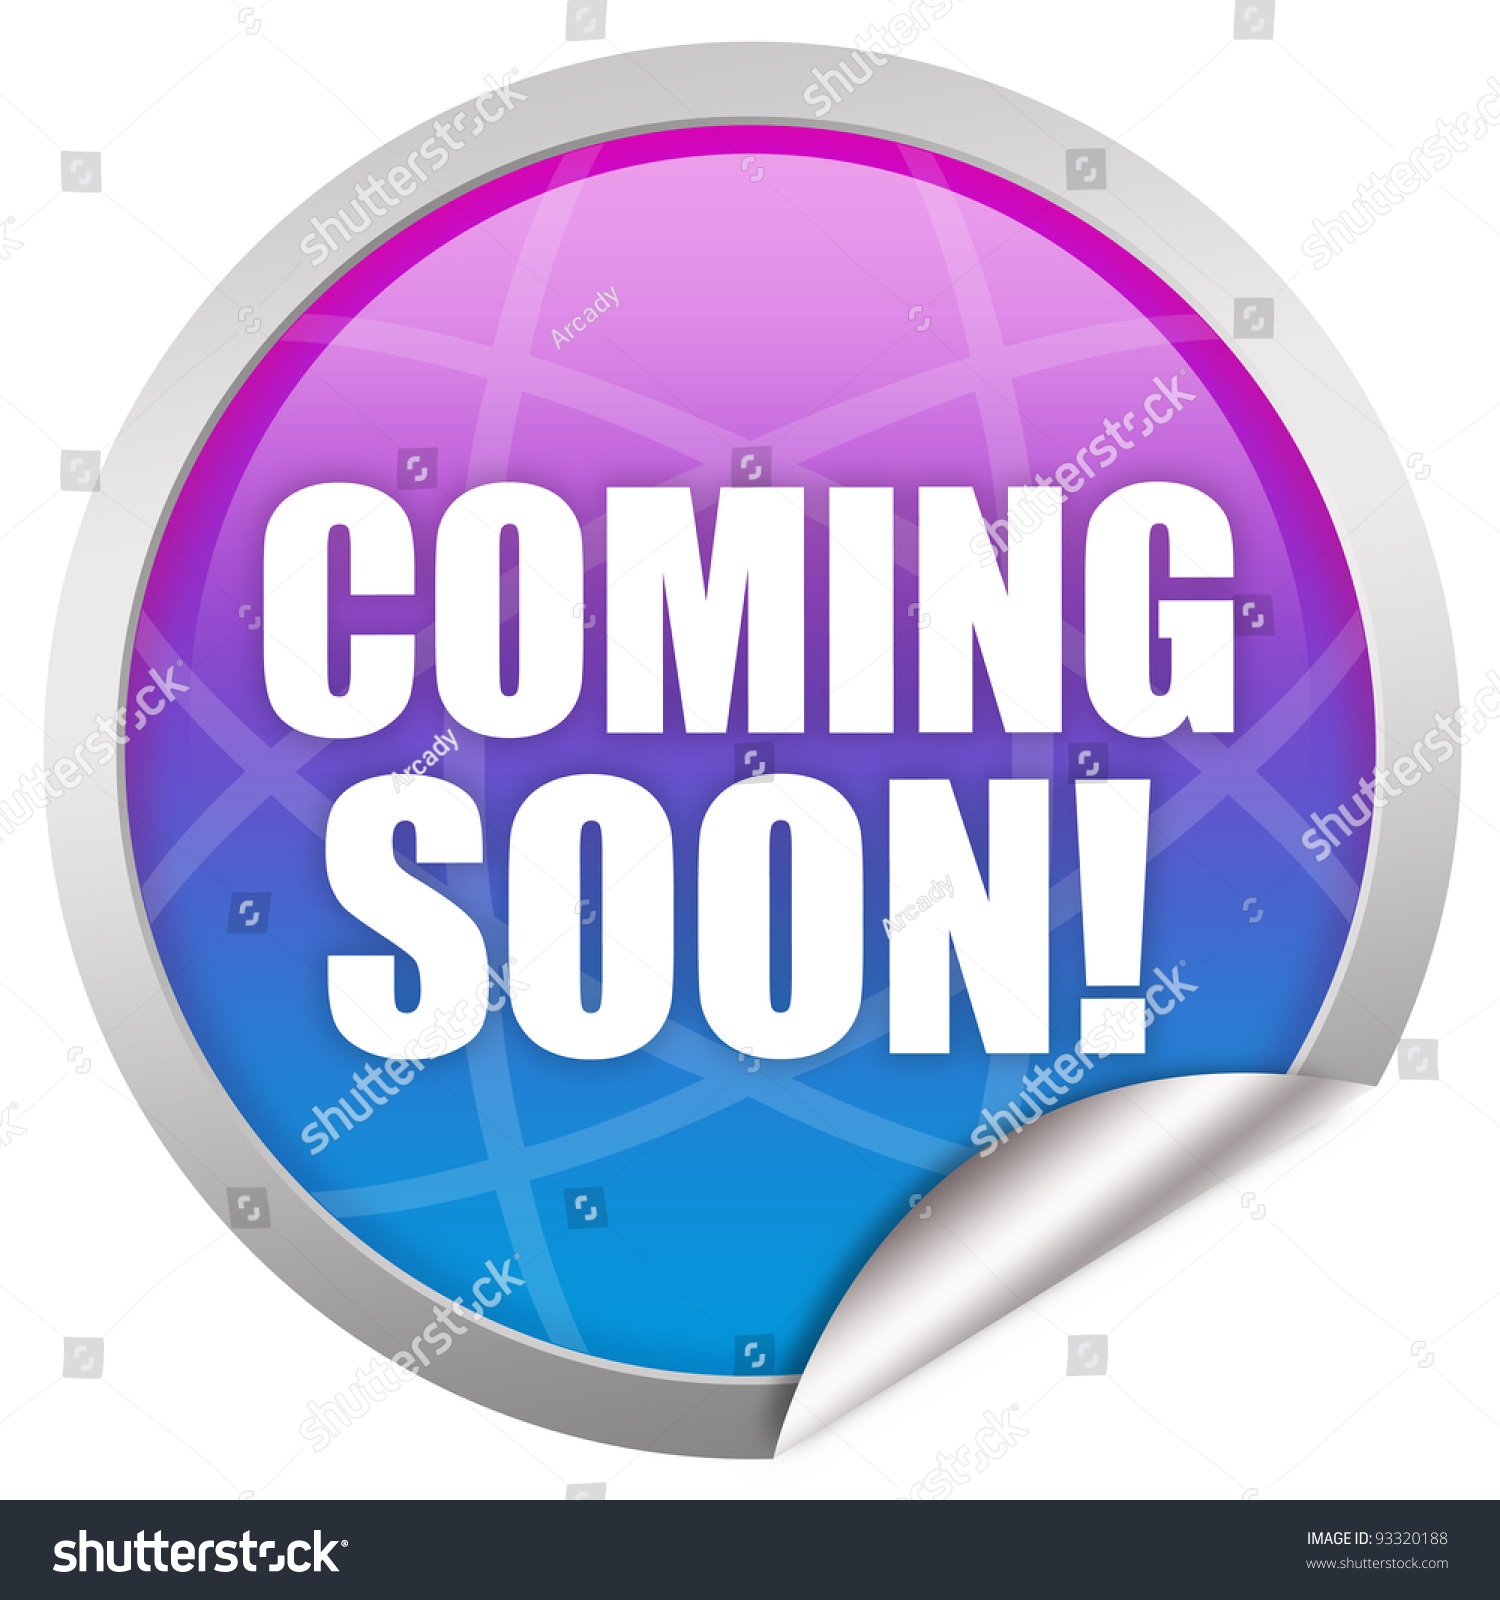 Coming Soon Label Stock Photo 93320188 : Shutterstock